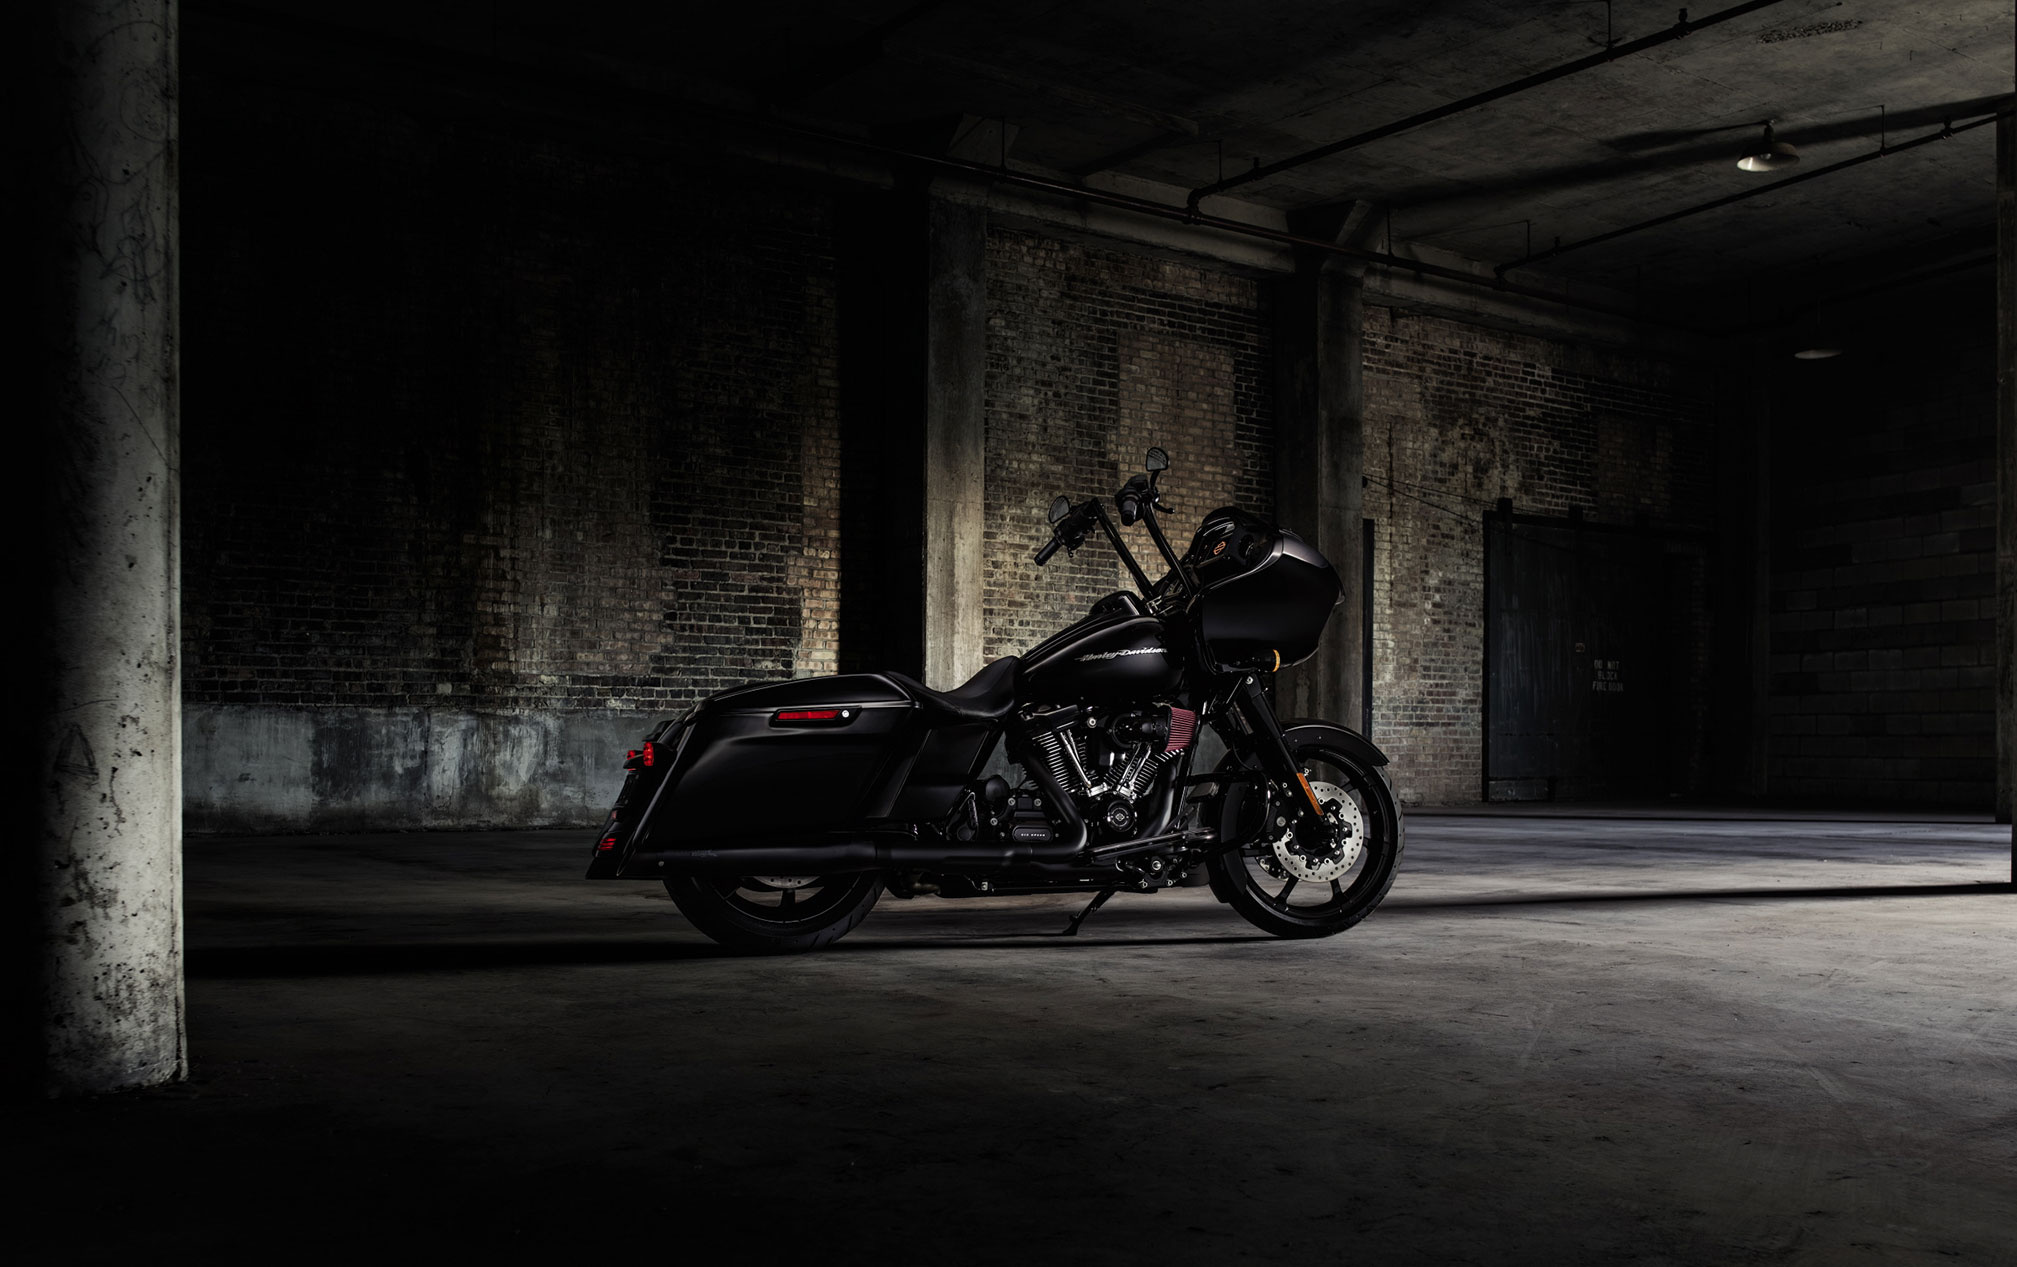 Harley-Davidson Road Glide, Special edition wallpapers, Born to ride, Ultimate freedom, 2020x1270 HD Desktop